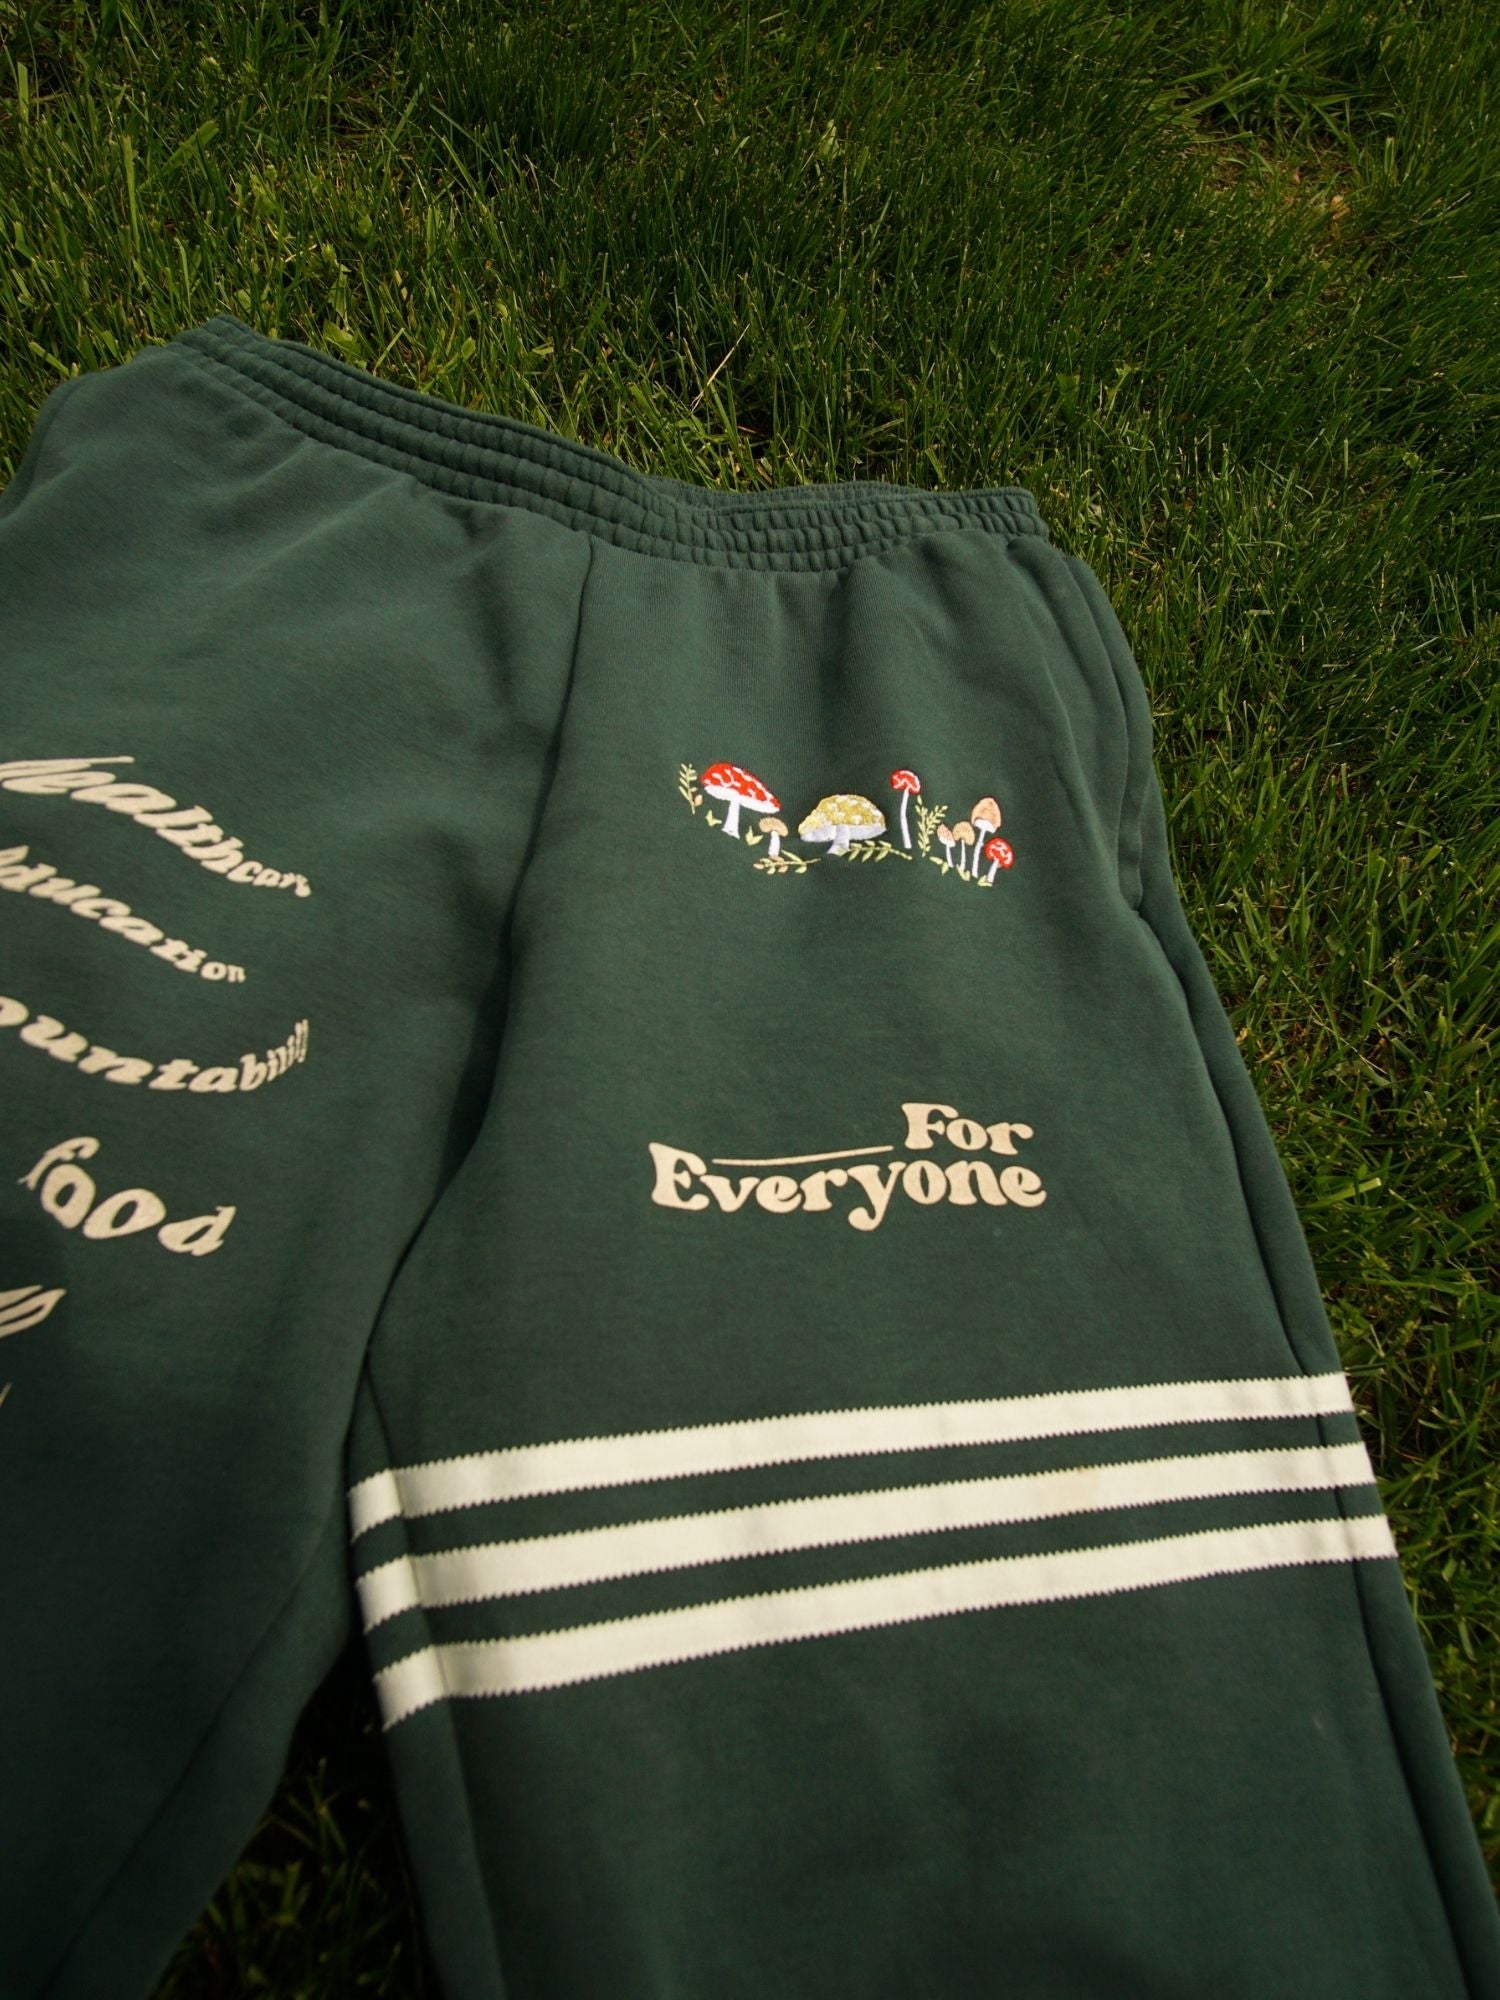 1:1 Spruce Embroidered Sweatpants